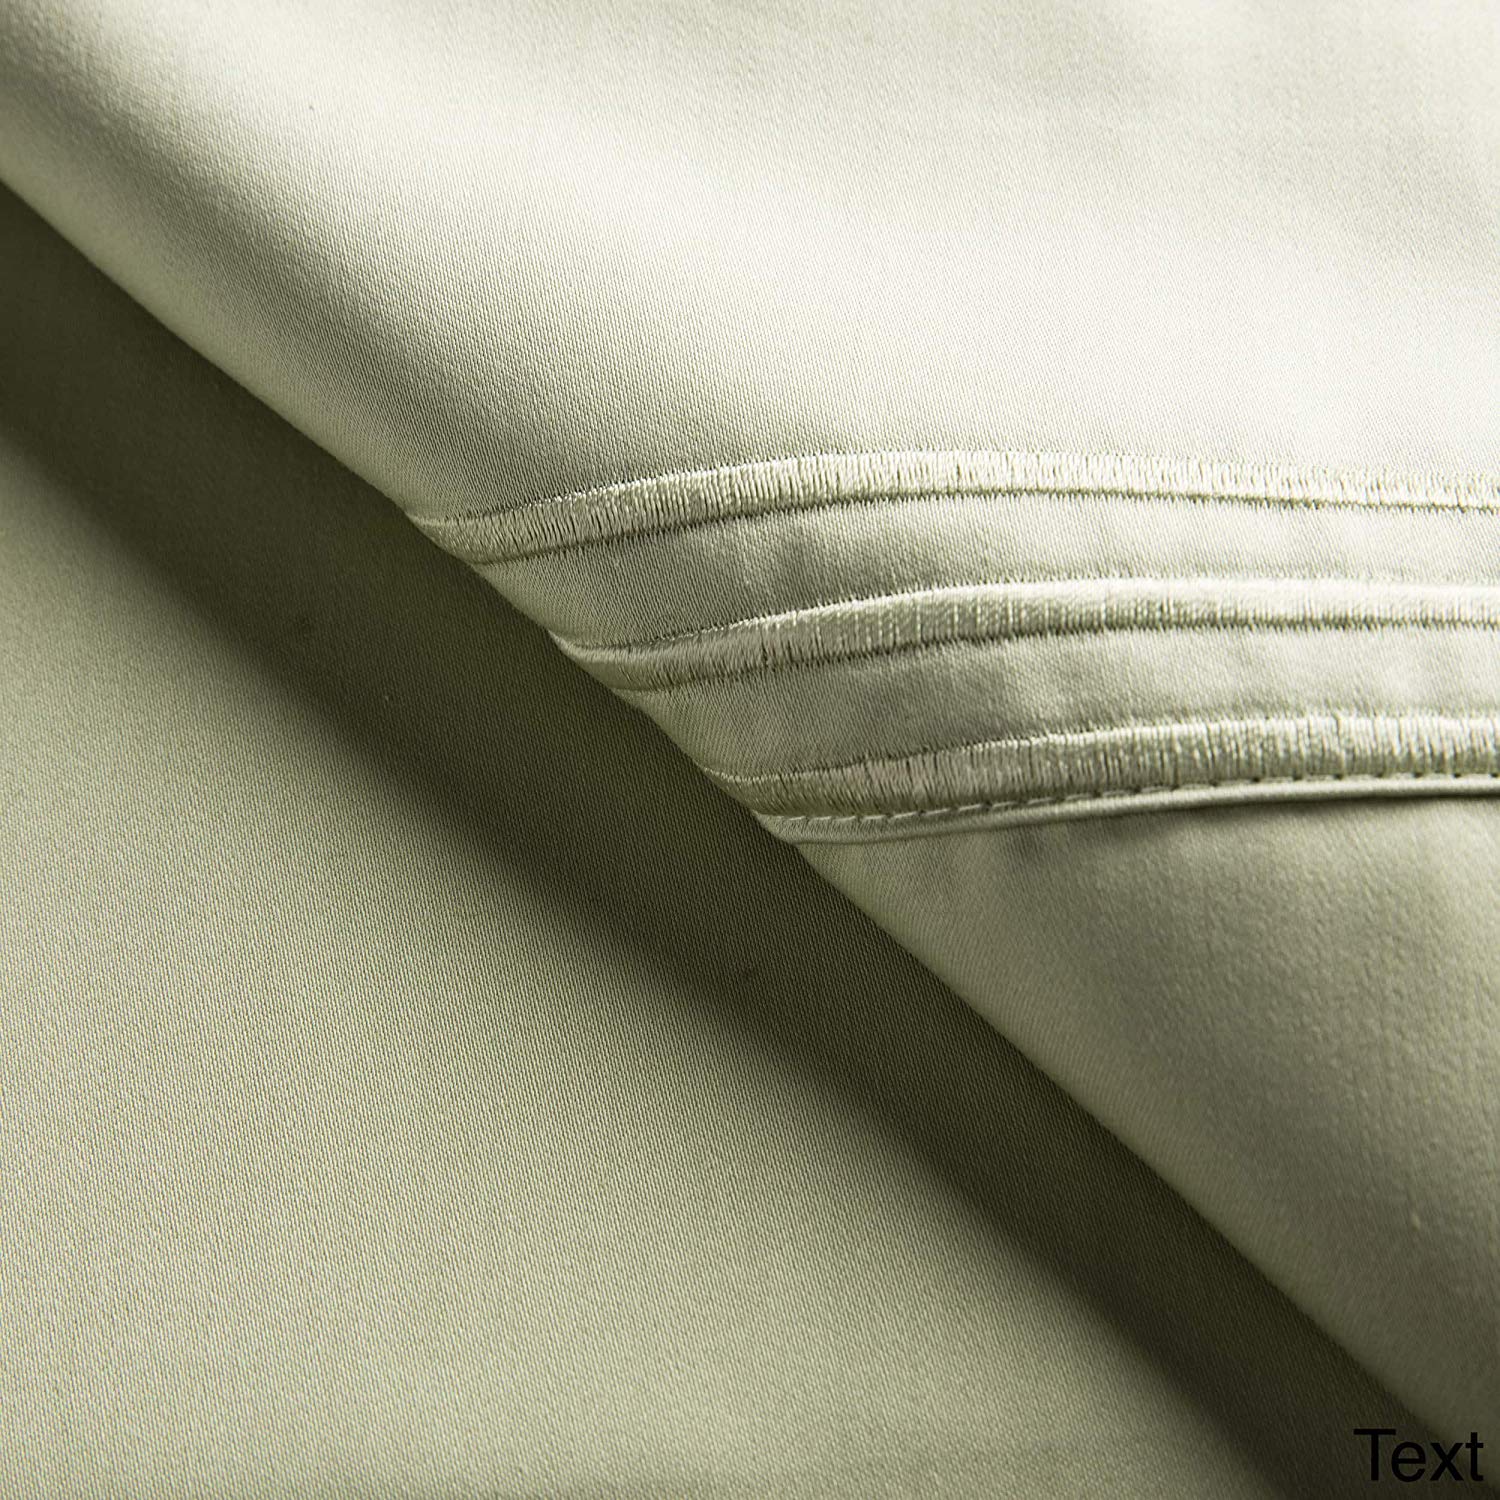 PureCare New Purecare Luxurious Supersoft Celliant Sateen Cal. King Sage Green Sheet Set